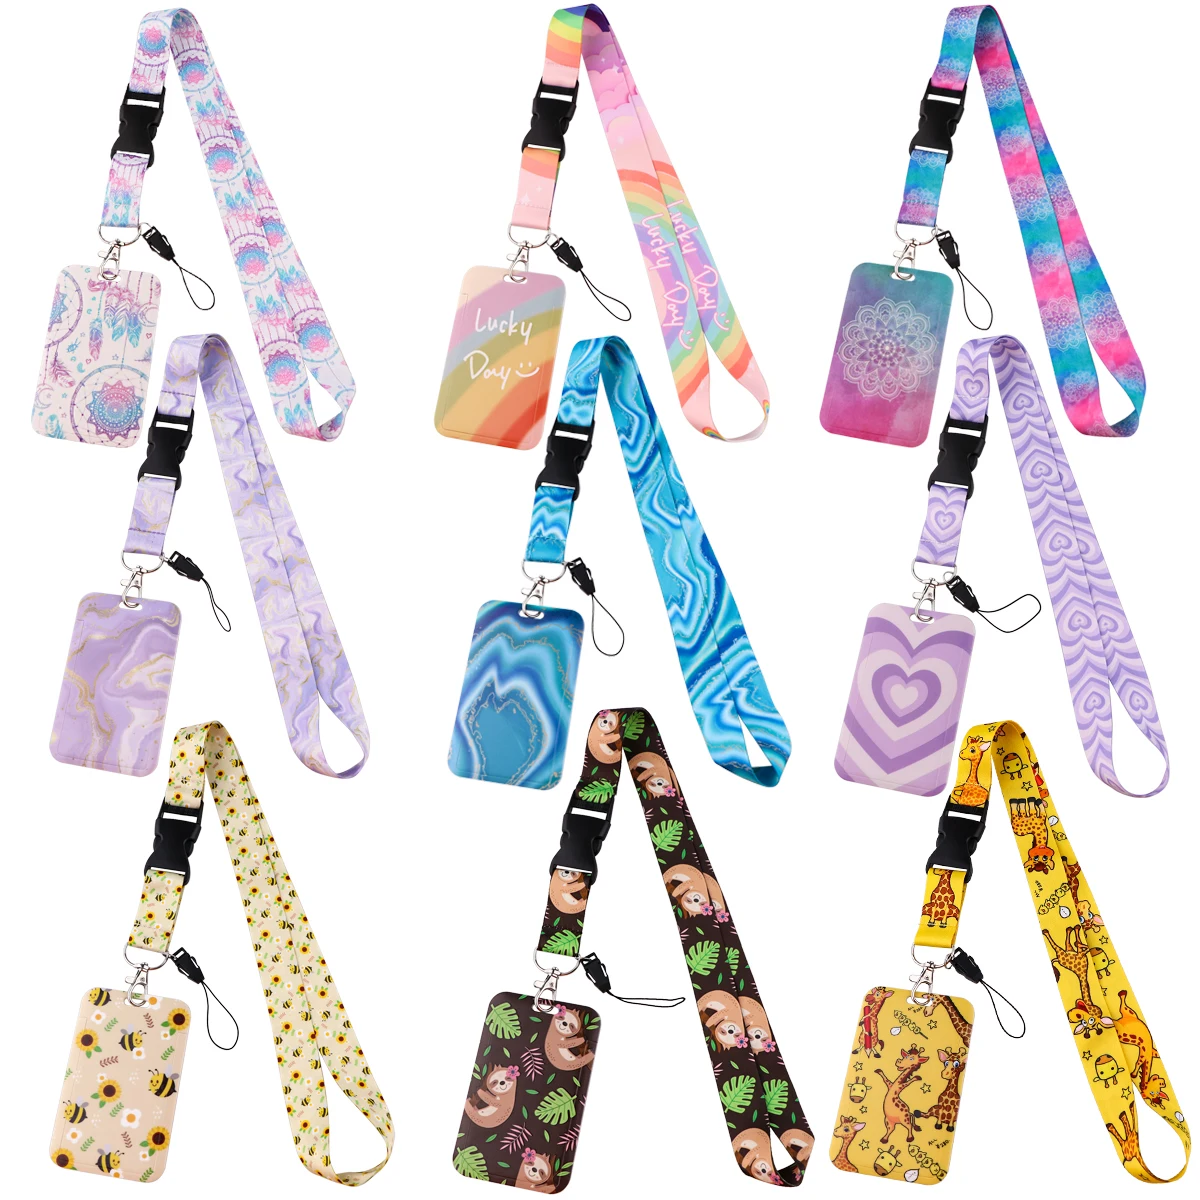 Marble Printing Lanyards for Keys Neck Strap ID Card Gym Cell Phone Straps USB Badge Holder DIY Hang Rope Neckband Accessories small leaves neck strap lanyards for keys id card gym cell phone straps usb badge holder diy phone hanging rope flowers lanyard